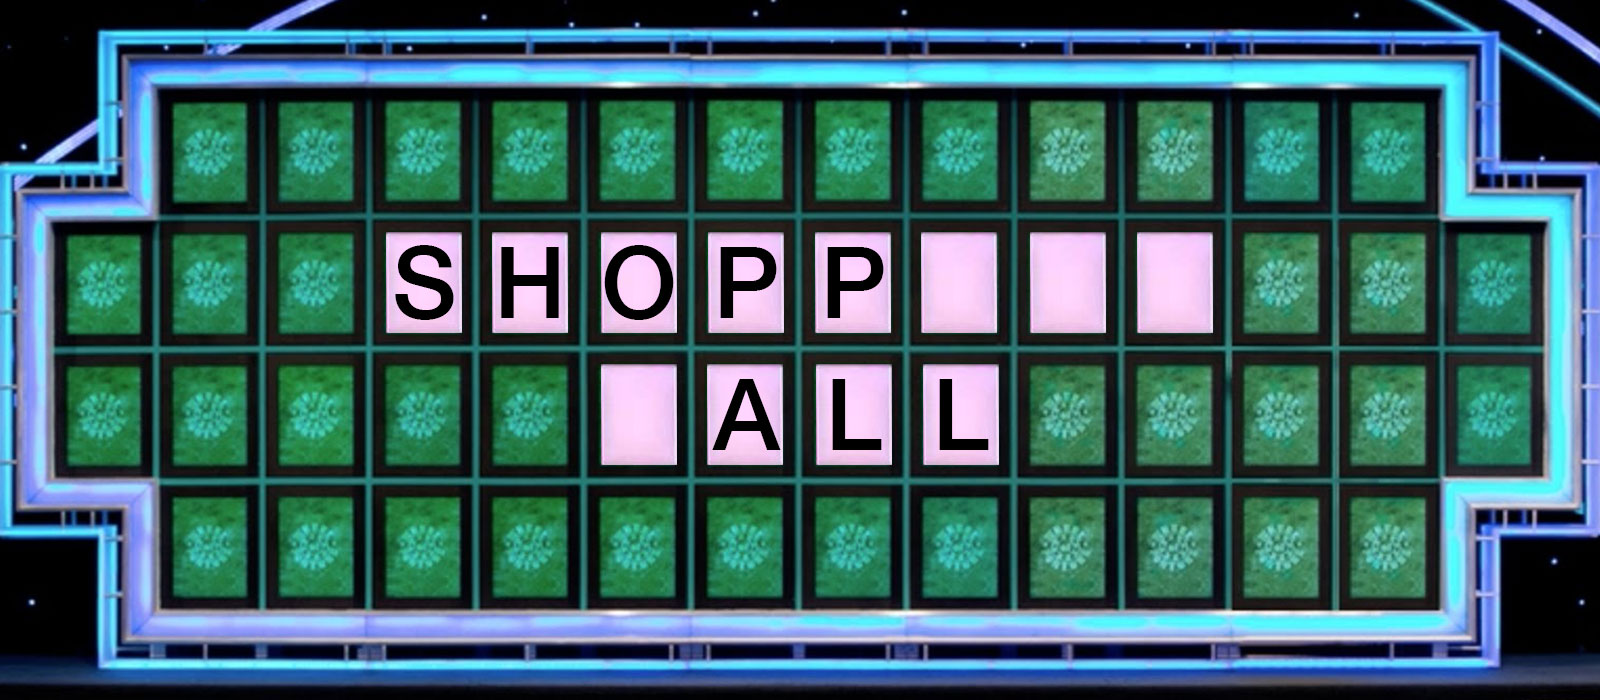 Can You Solve These Wheel of Fortune Puzzles? 715